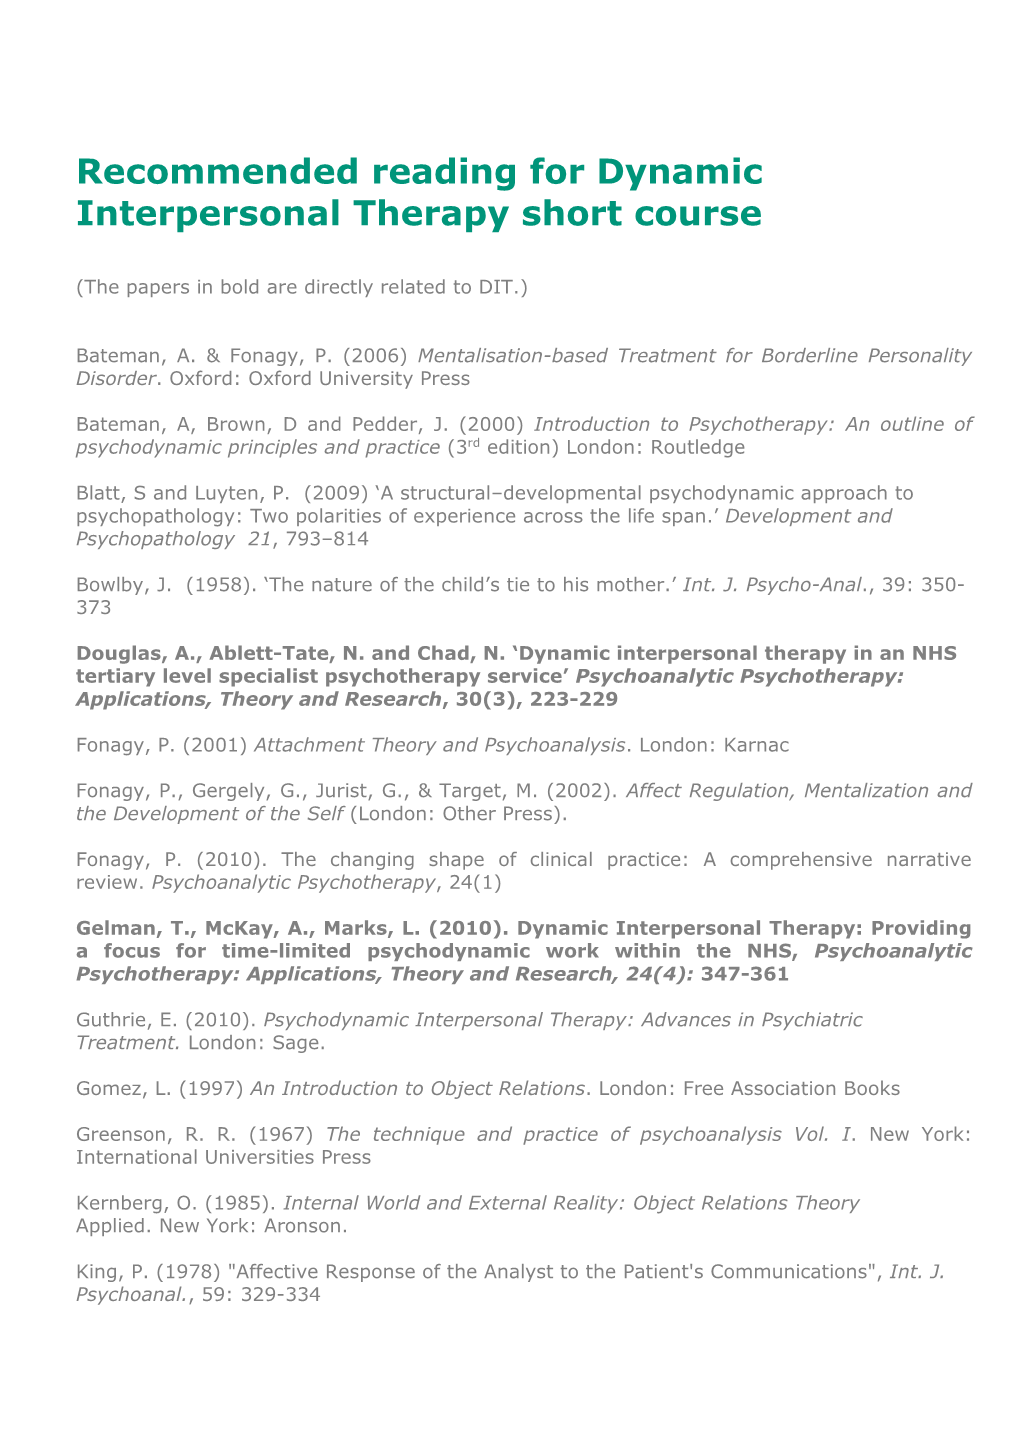 Recommended Reading for Dynamic Interpersonal Therapy Short Course